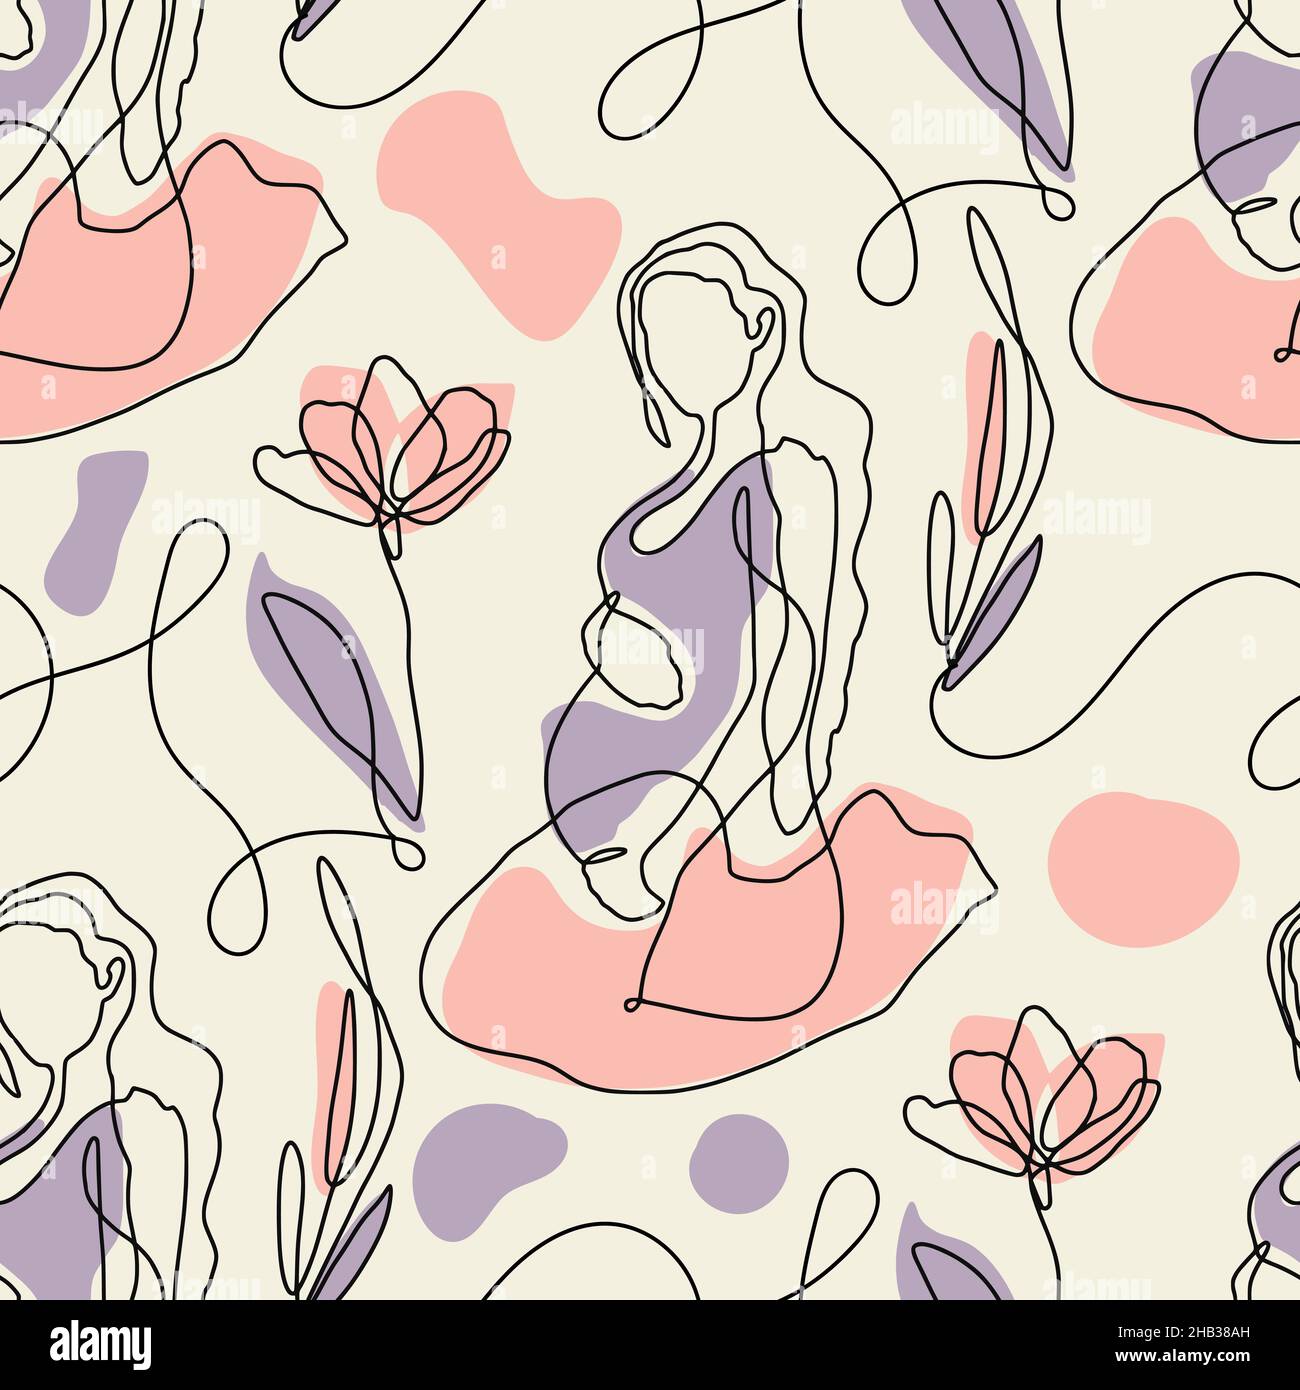 Gynecology and pregnancy linear seamless Vector Image